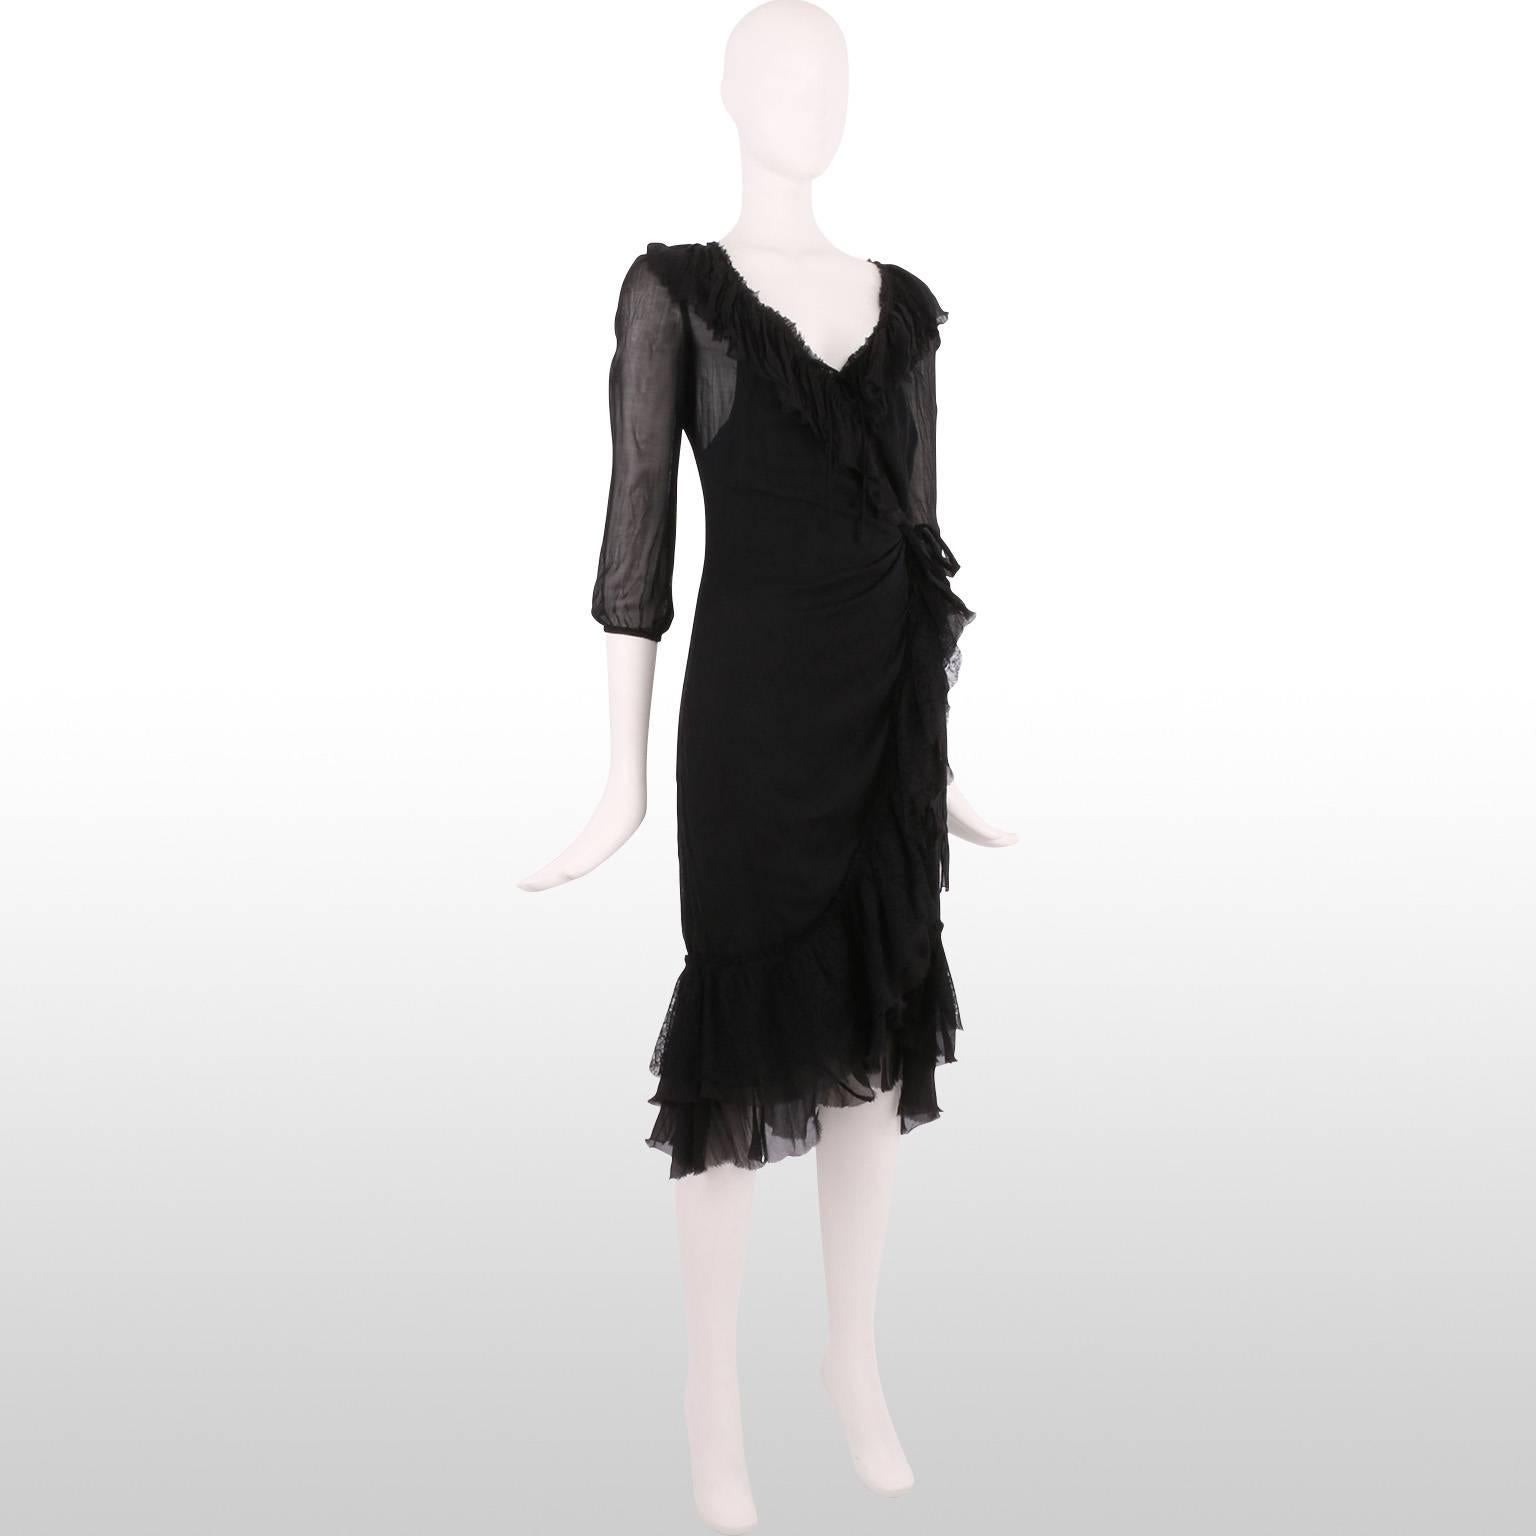 This is a very chic and delicate black sheer silk dress by the design house Prada. The dress has a V neckline, is wrapped & secured with a bow on the left hand side and has an attached black sleeveless underdress. Along the trim of the dress there